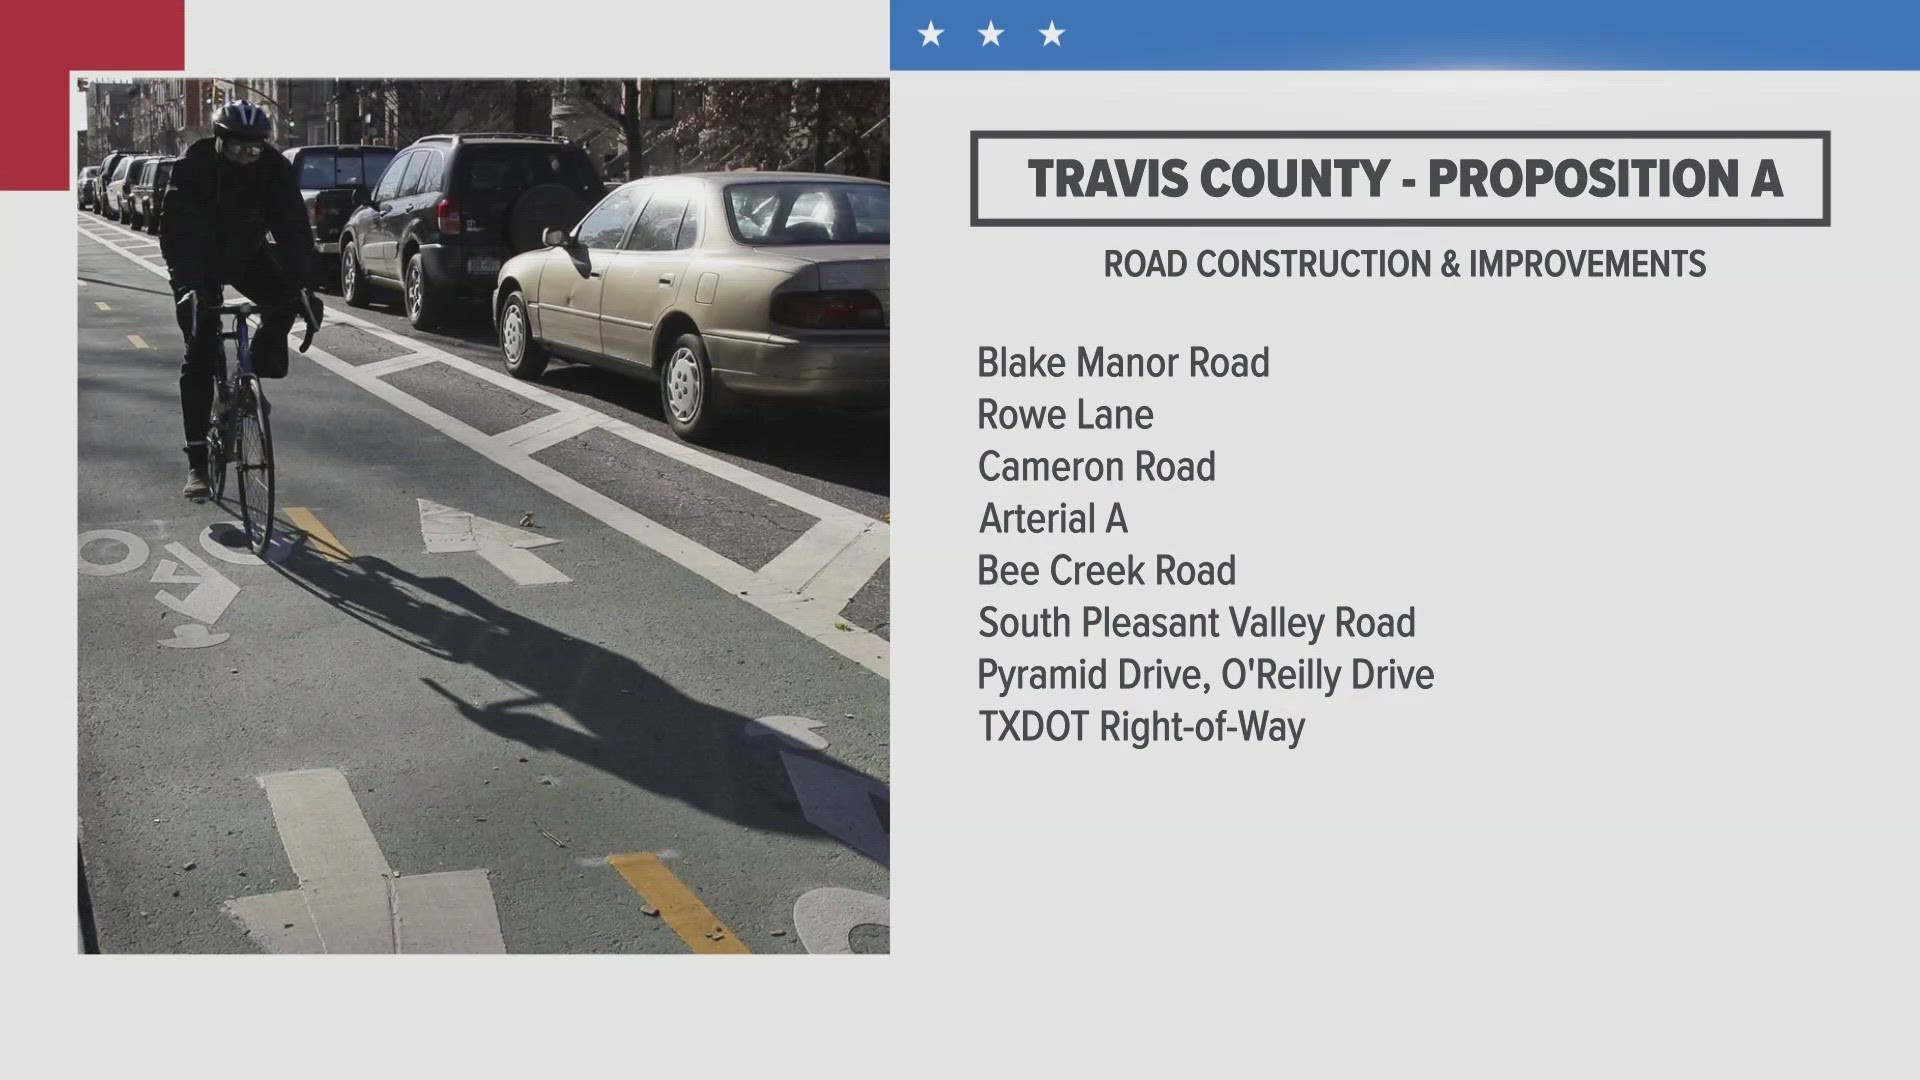 We're taking a look at what's on the Nov. 7 ballot in Travis County. KVUE's Dominique Newland breaks down Propositions A and B.